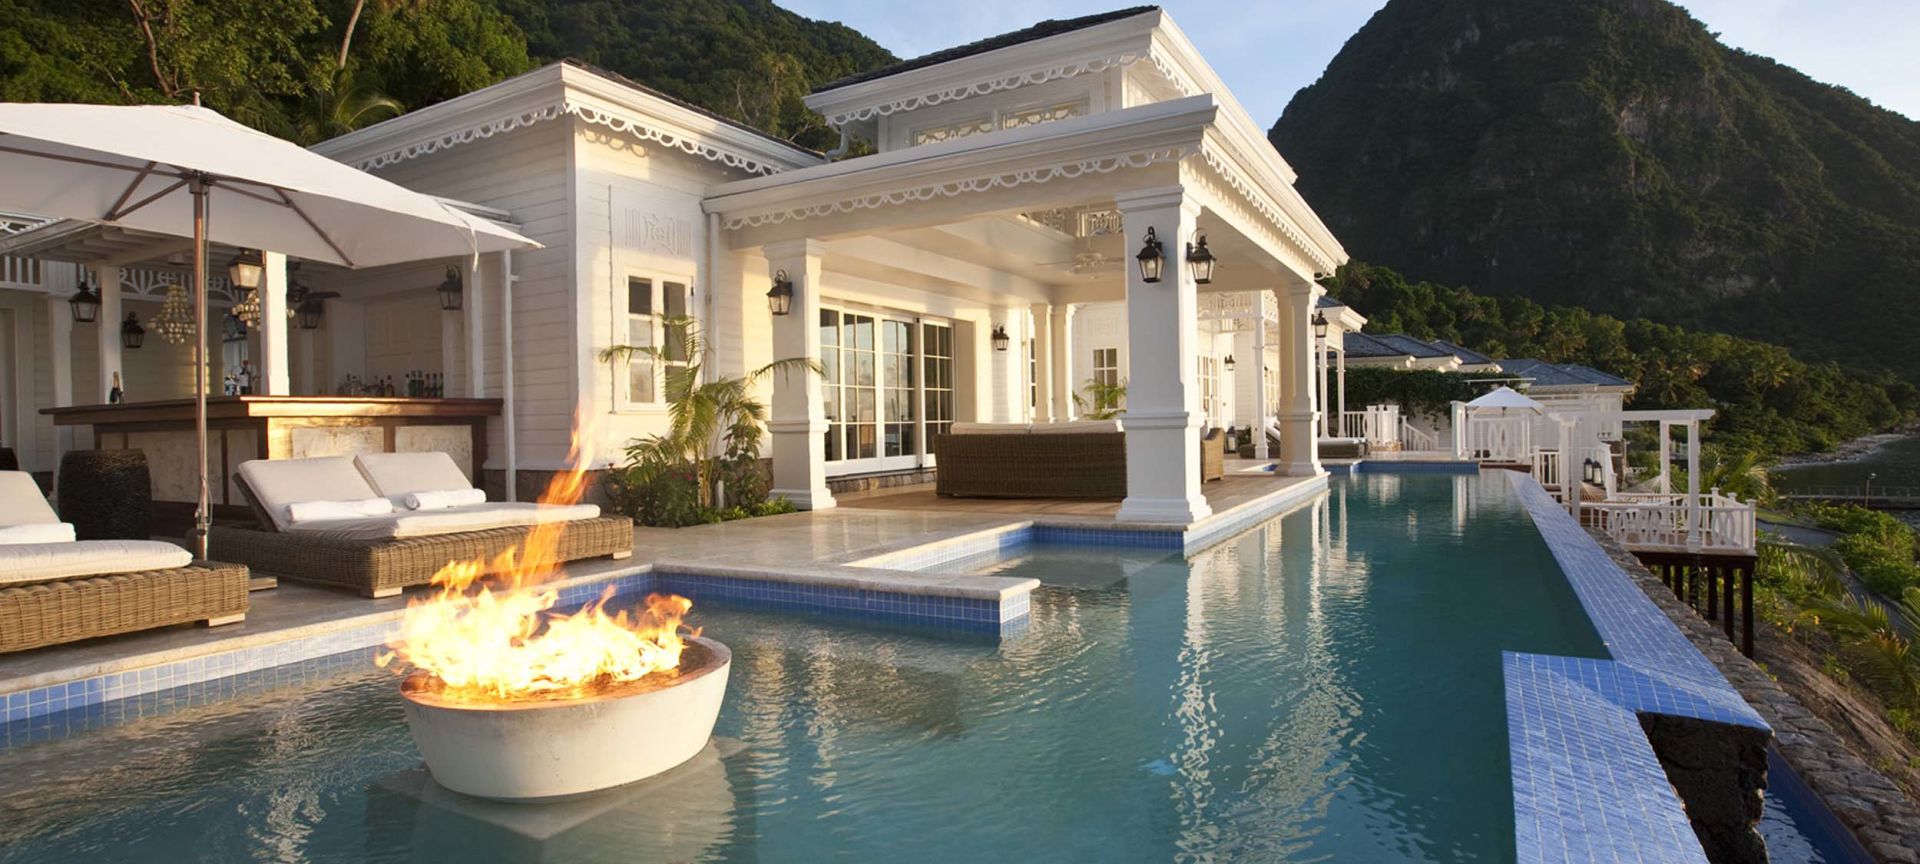 A Pool With A House In The Background